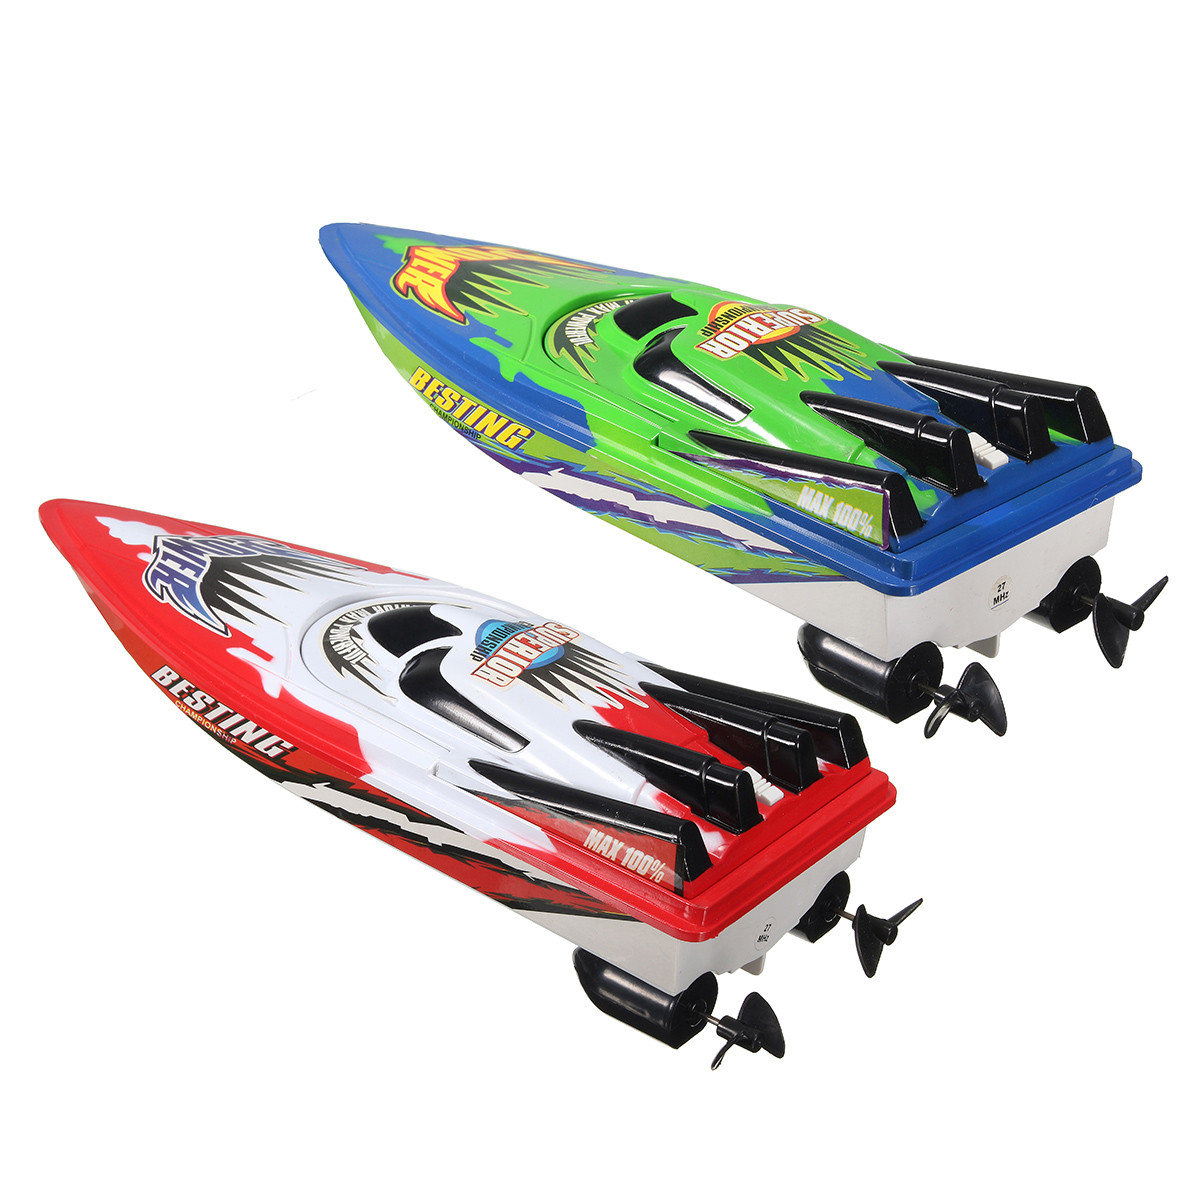 Red-Green-Plastic-Durable-Remote-Control-Twin-Motor-High-Speed-Racing-RC-Boat-Toy-1106287